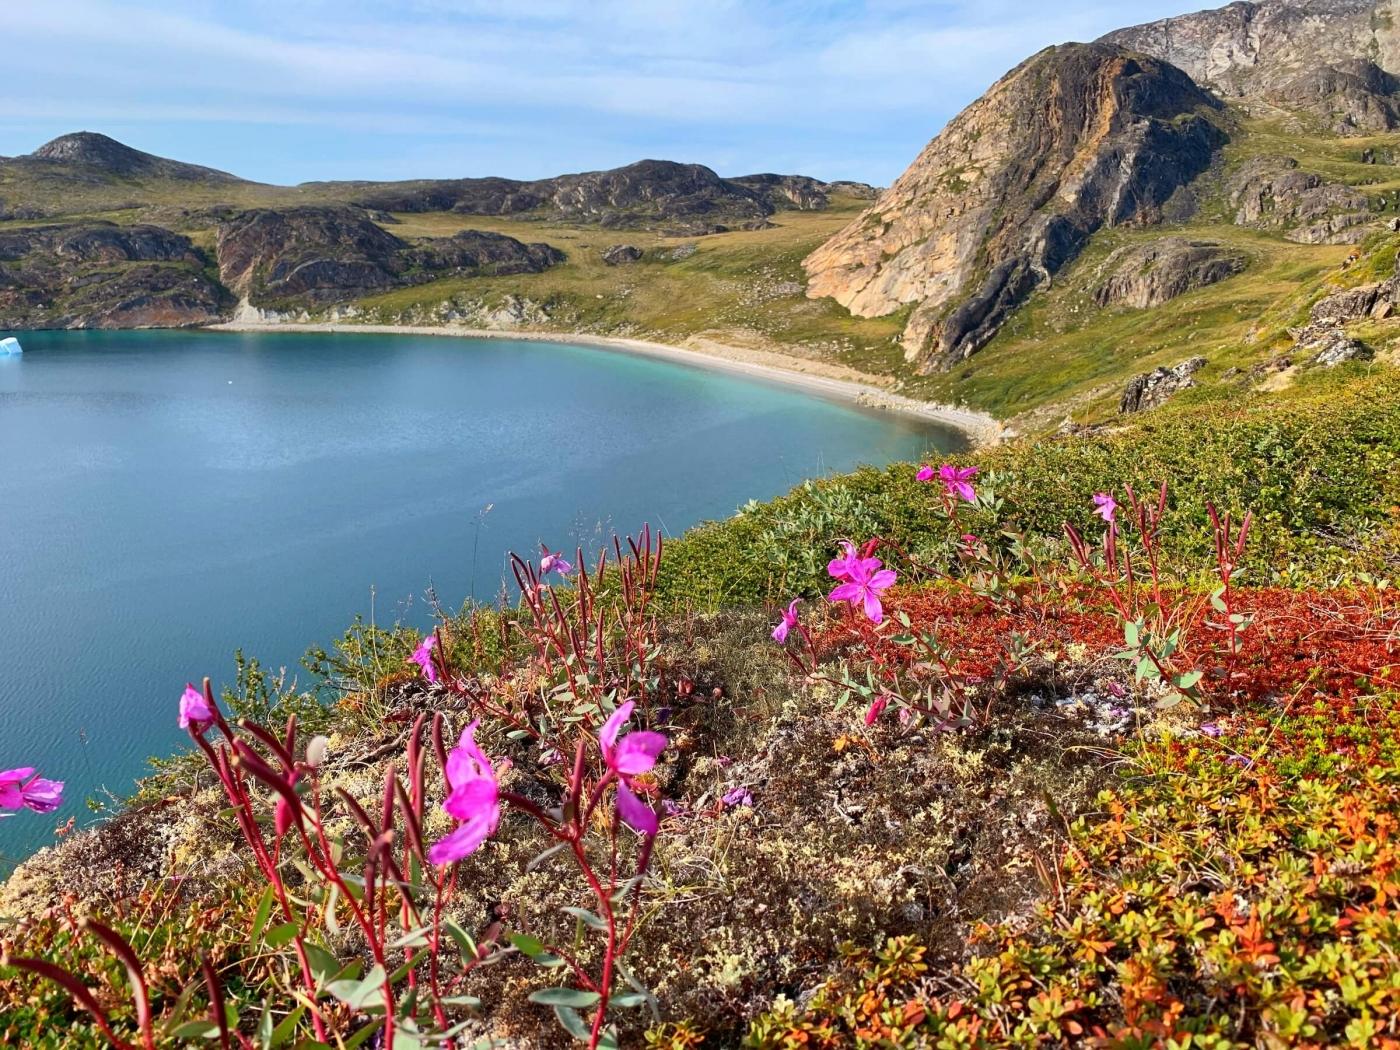 Blossoming flowers in Paradise bay. Photo by Espen Andersen, Visit Greenland